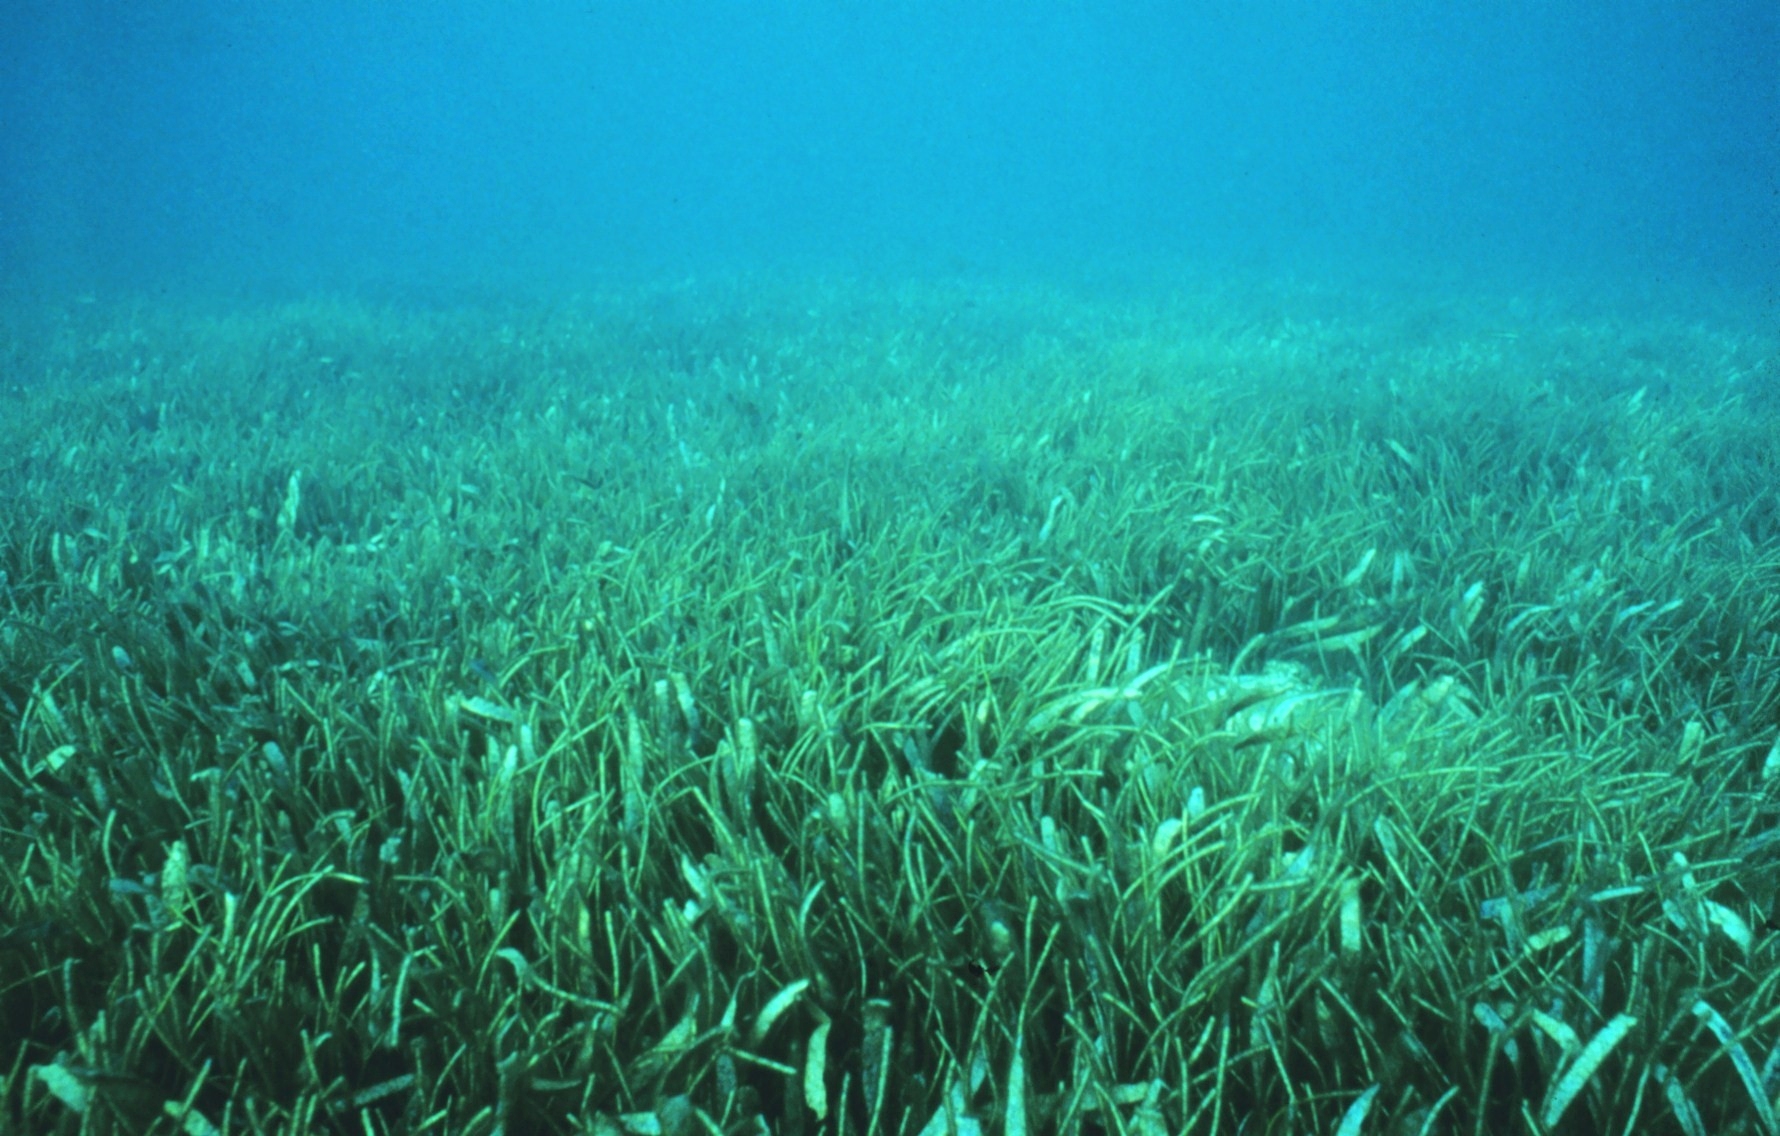 Dwarf seahorse habitat in the seagrass bed